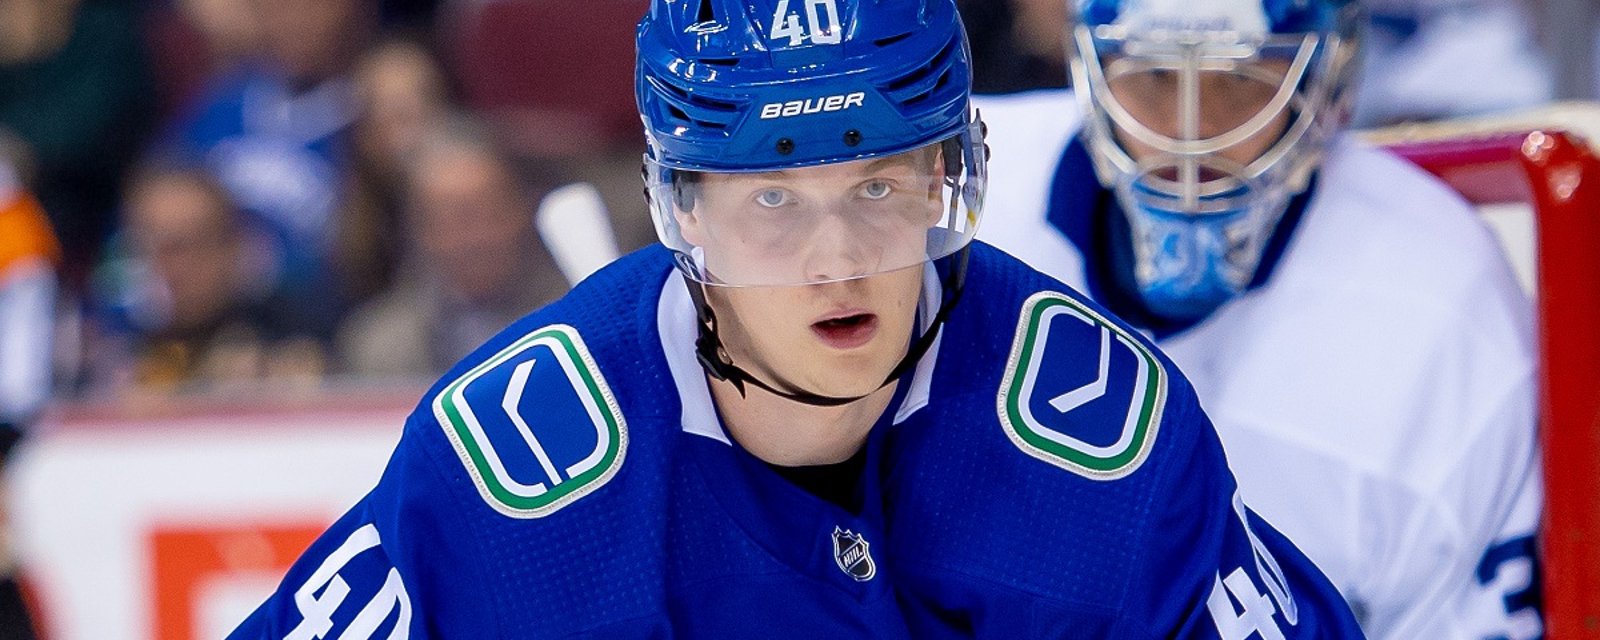 Rookie superstar Elias Pettersson accosted by “fans” in his car.